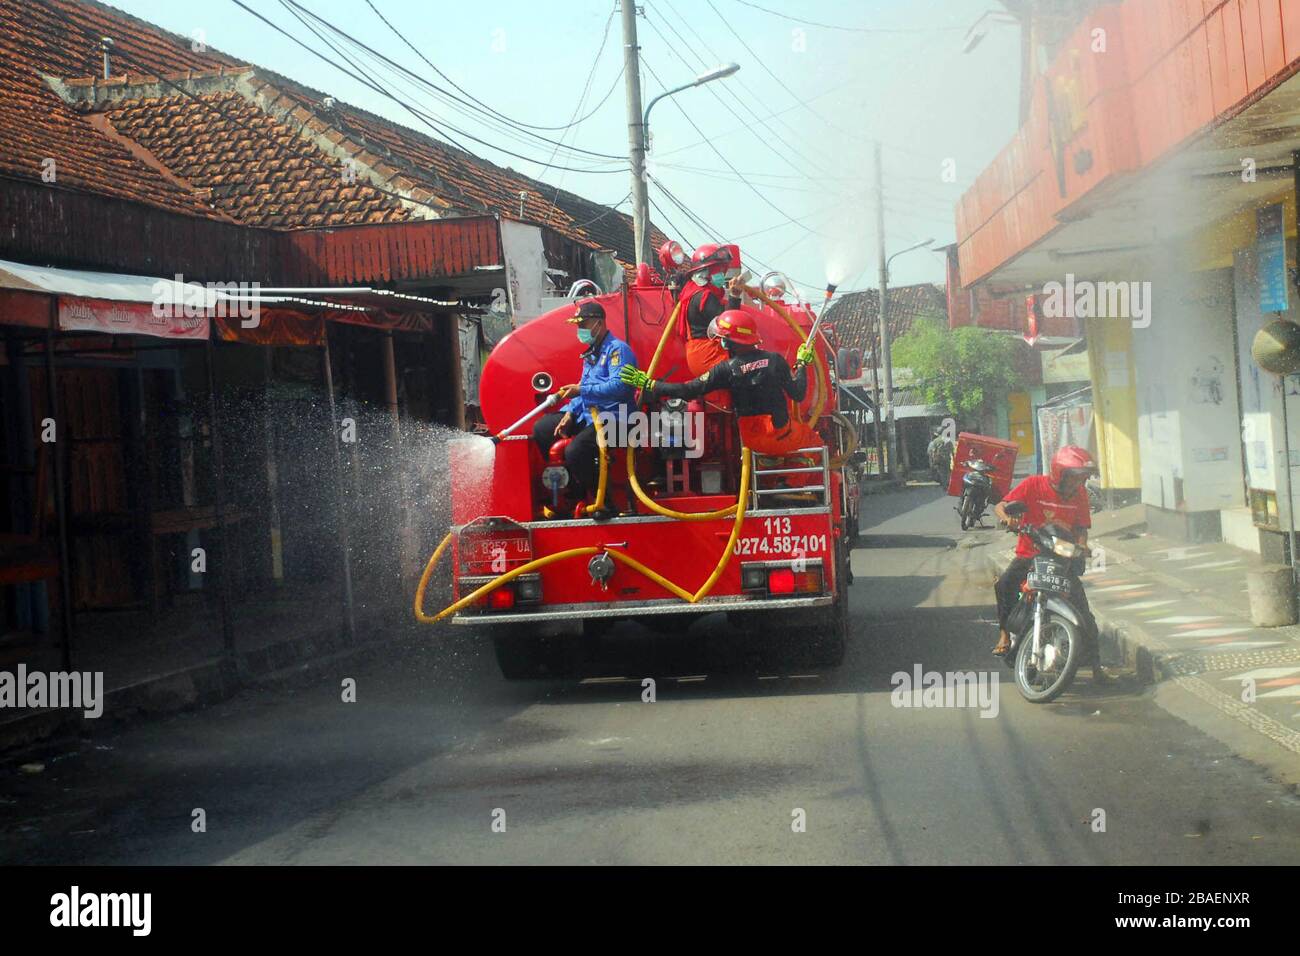 Yogyakarta, Indonesia. 27th Mar, 2020. Firefighters spray disinfectant in Yogyakarta, Indonesia, March 27, 2020. The Indonesian government said the death toll of COVID-19 in the country climbed to 87 on Friday, the highest in Southeast Asia. Meanwhile, the number of confirmed cases jumped to 1,046 from 893 in 24 hours. Credit: Juli Nugroho/Xinhua/Alamy Live News Stock Photo